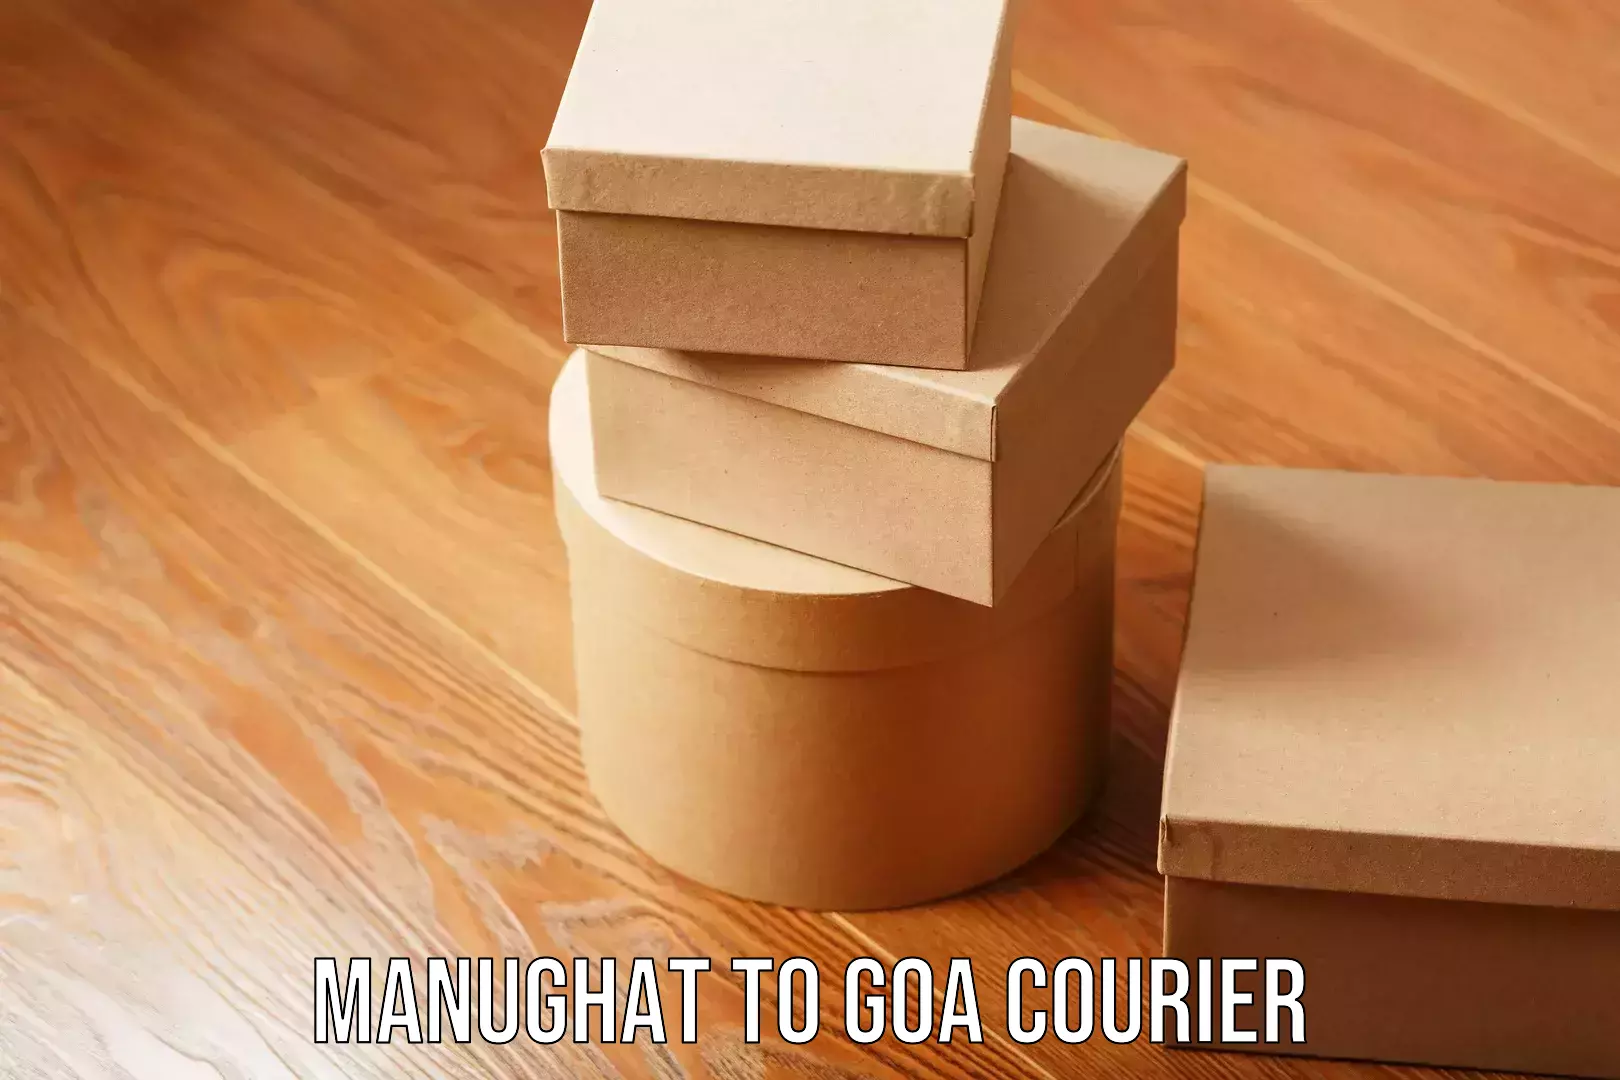 Efficient courier operations Manughat to Goa